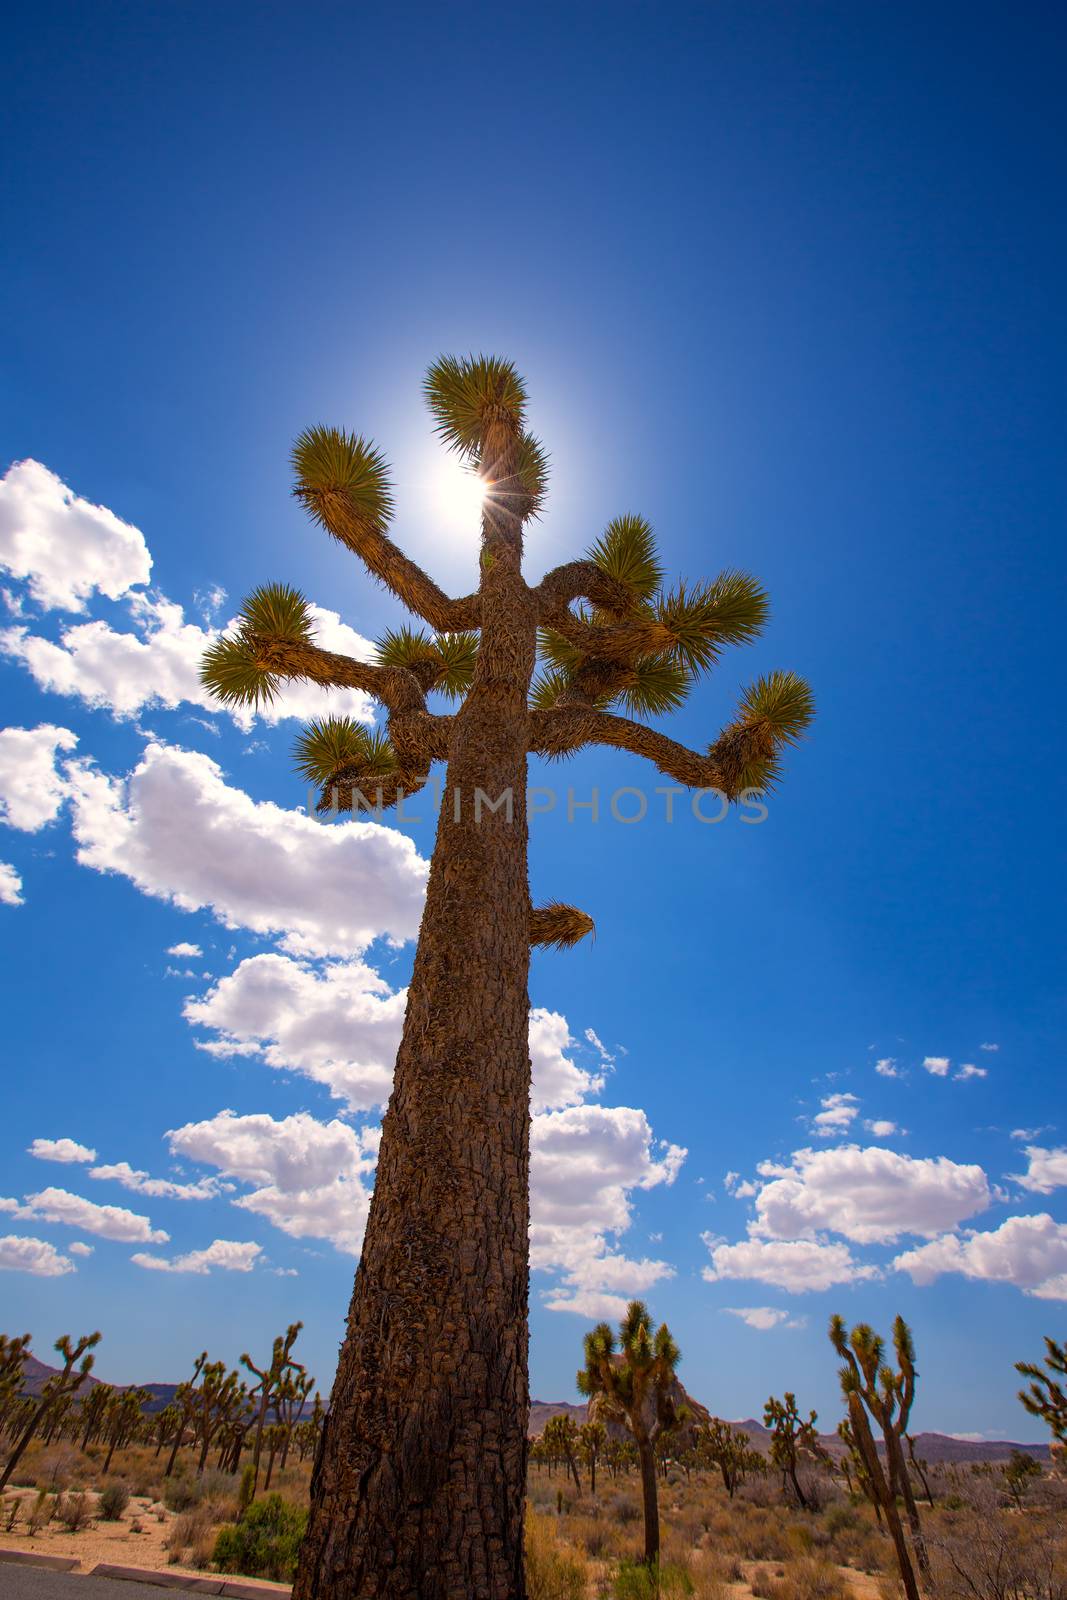 Joshua Tree National Park Yucca Valley in Mohave desert California USA